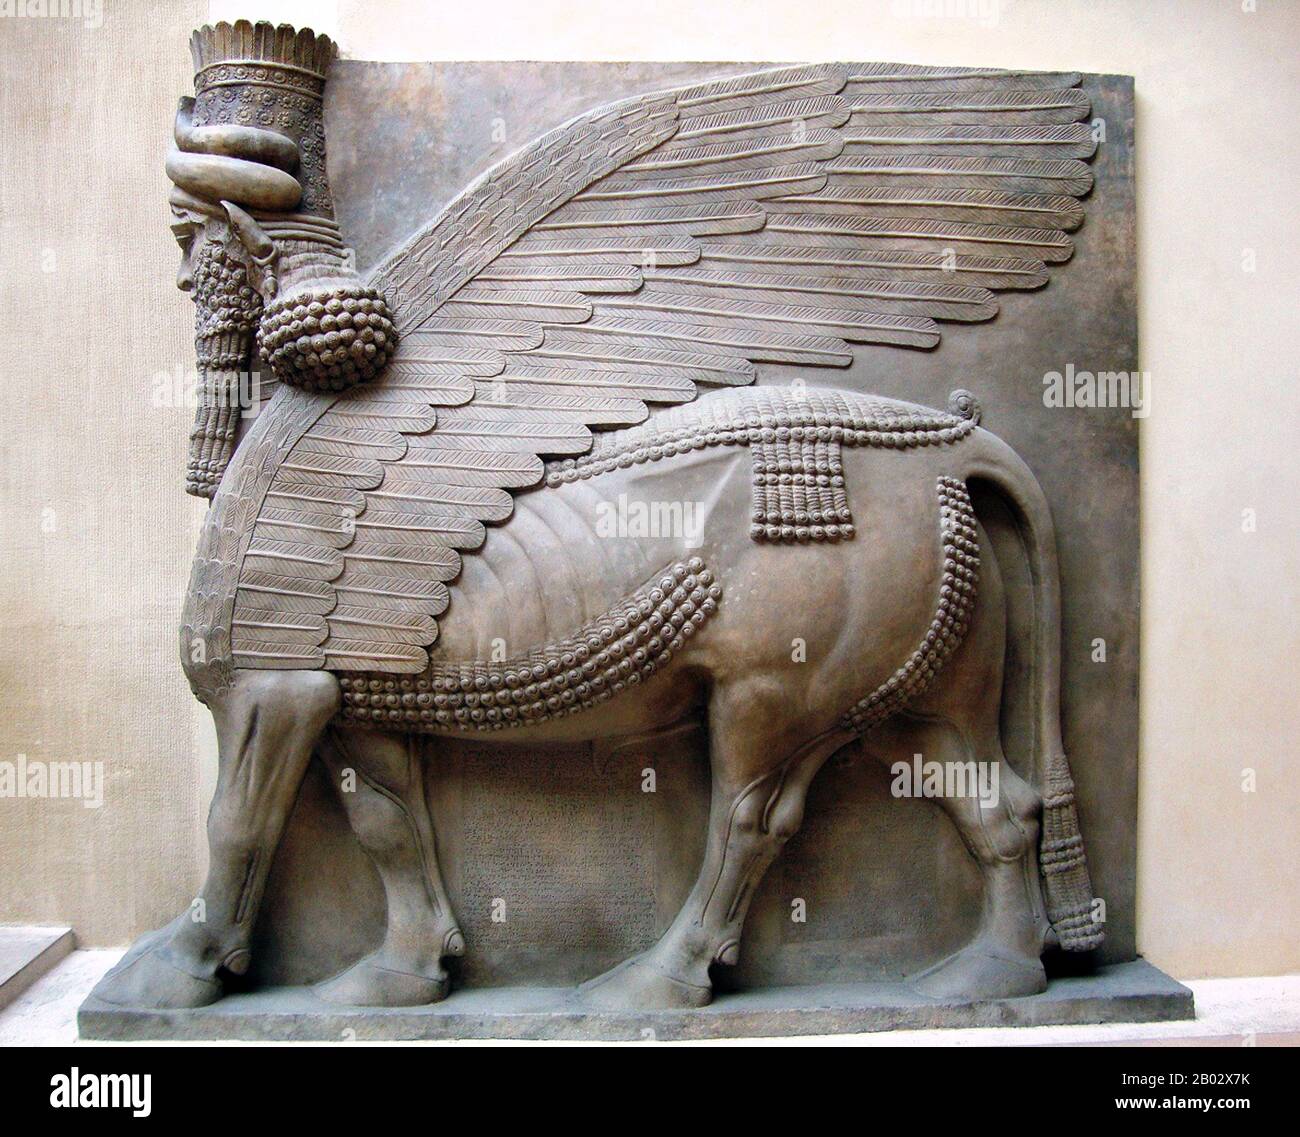 Sargon II was an Assyrian king. Sargon II became the ruler of the Assyrian Empire in 722 BCE after the death of Shalmaneser V.   In his inscriptions, he styles himself as a new man, rarely referring to his predecessors; however he took the name Sharru-kinu ('true king'), after Sargon of Akkad — who had founded the first Semitic Empire in the region some 16 centuries earlier. Sargon is the Biblical form of the name. Stock Photo